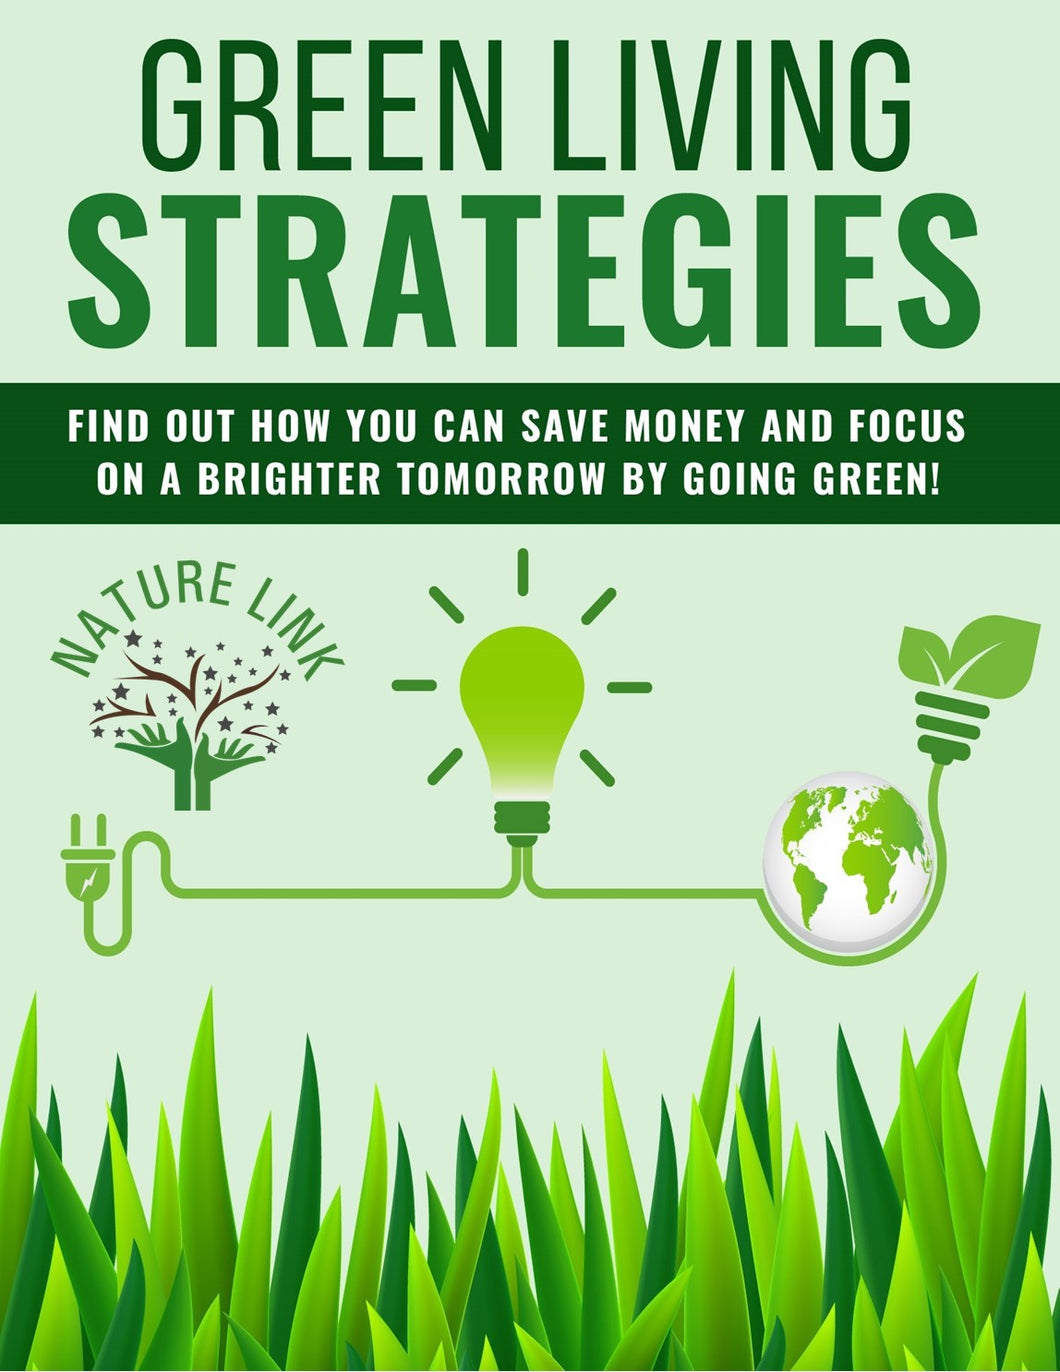 Green Living Strategies by Nature Link